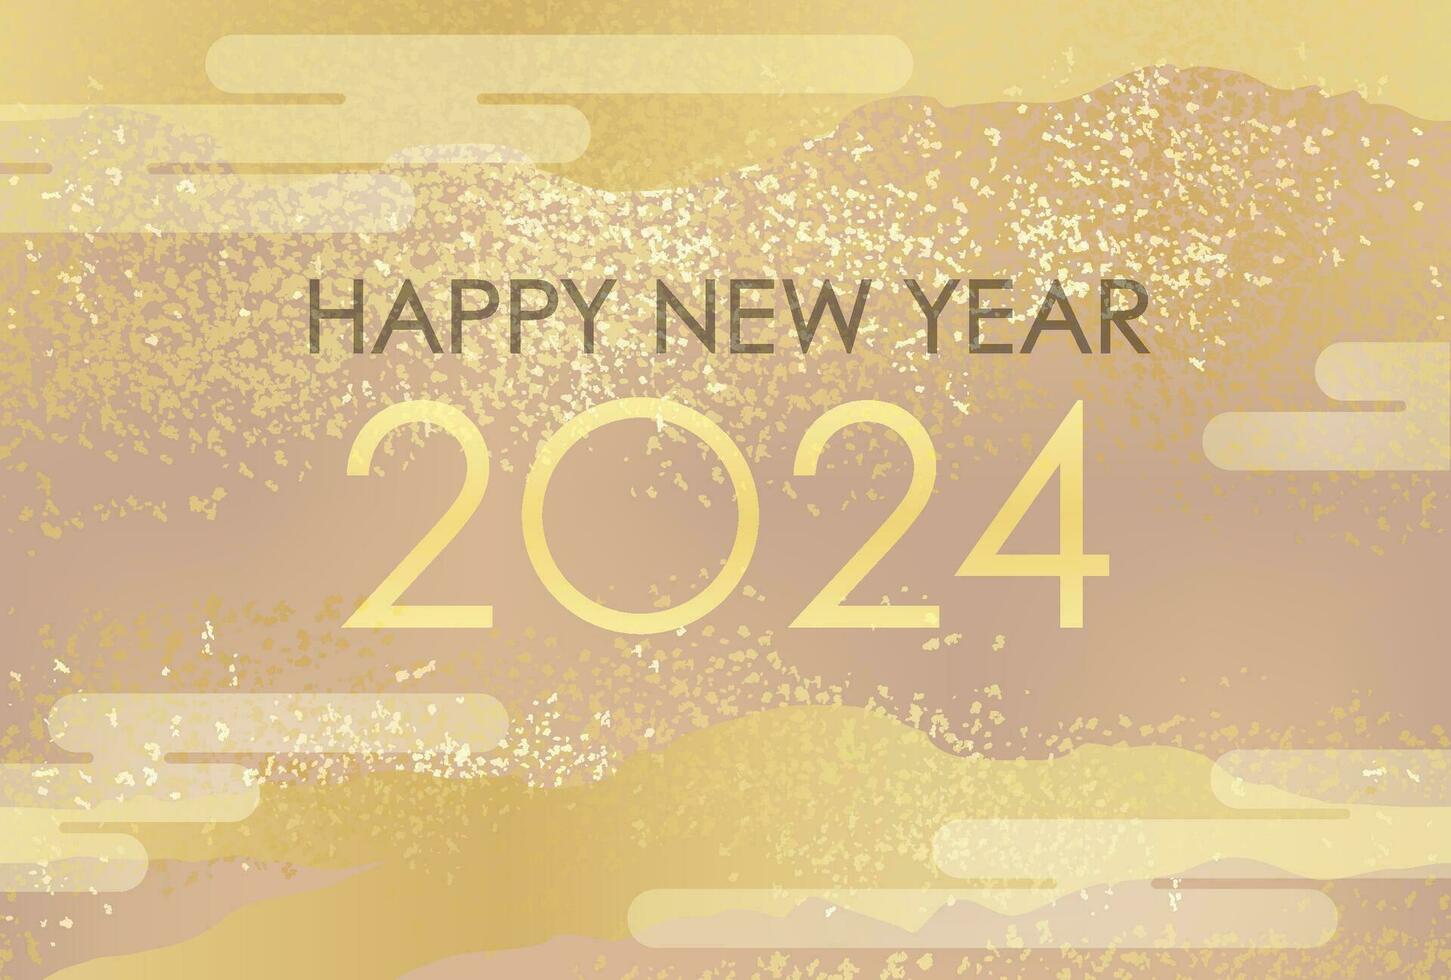 The Year 2024 Vector New Year Card Template With Text Space Decorated With Abstract Japanese Vintage Patterns.